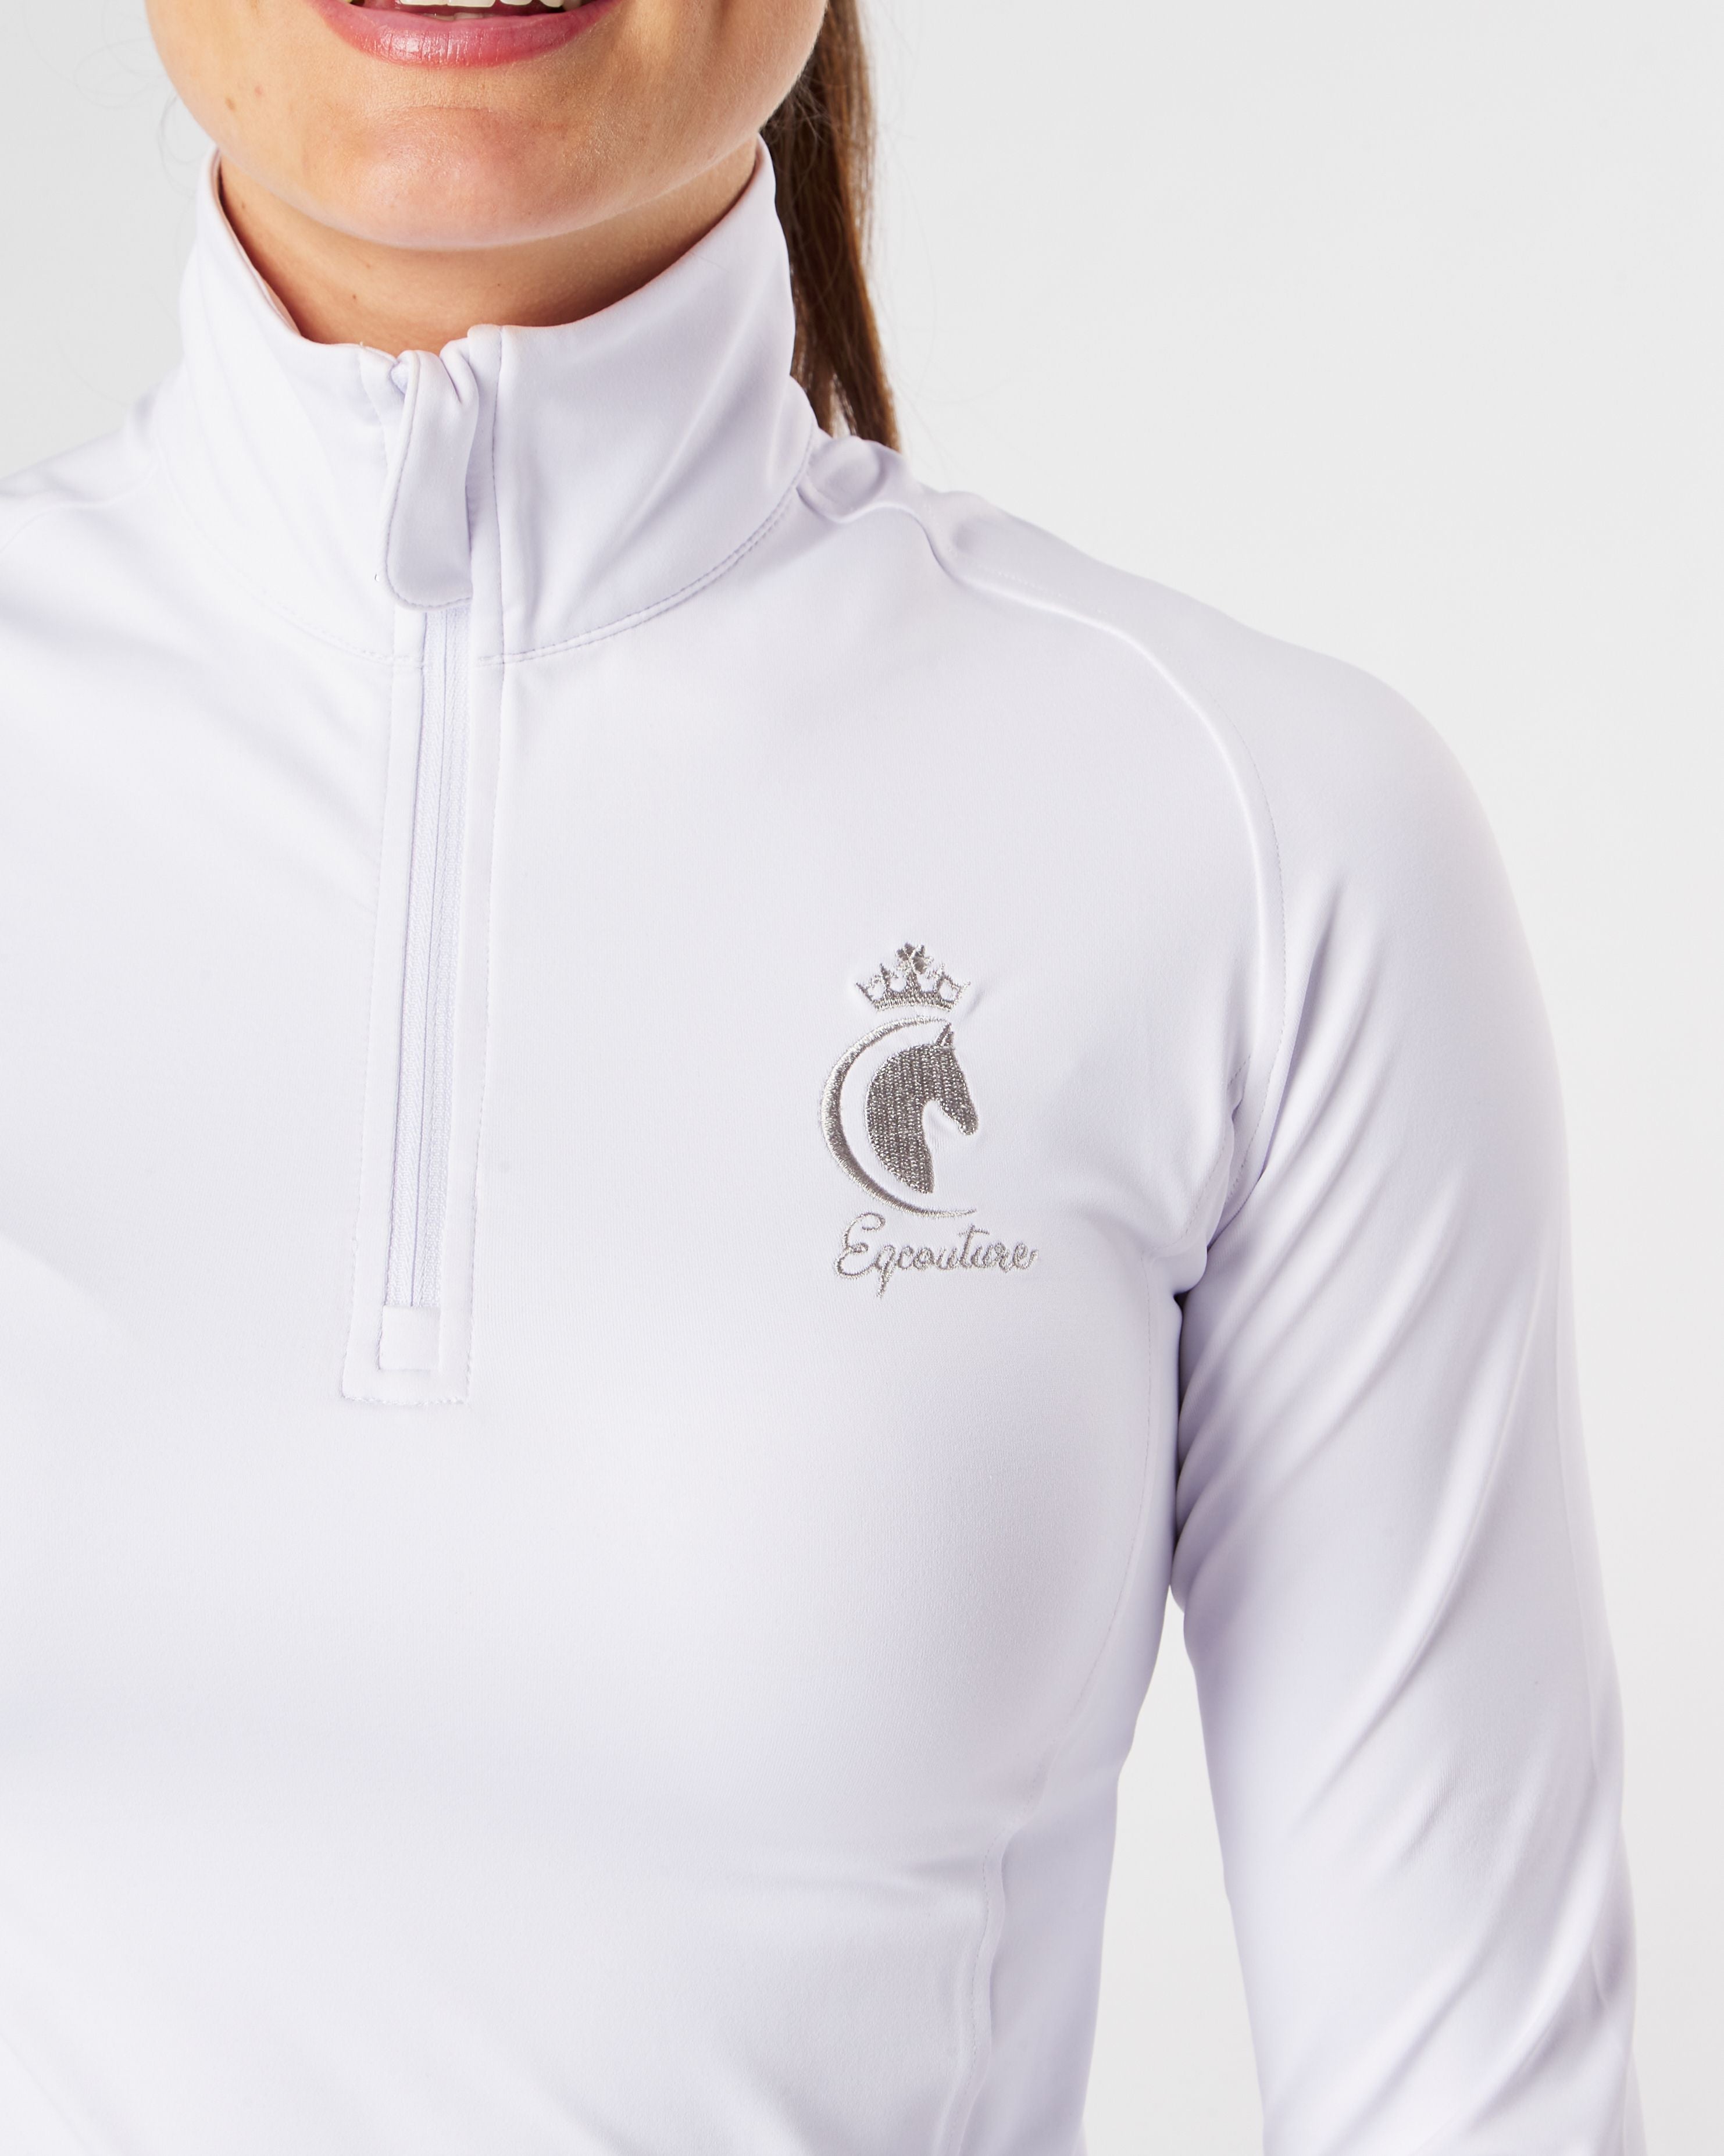 white /grey competition technical equestrian base layer show shirt / sports horse riding top